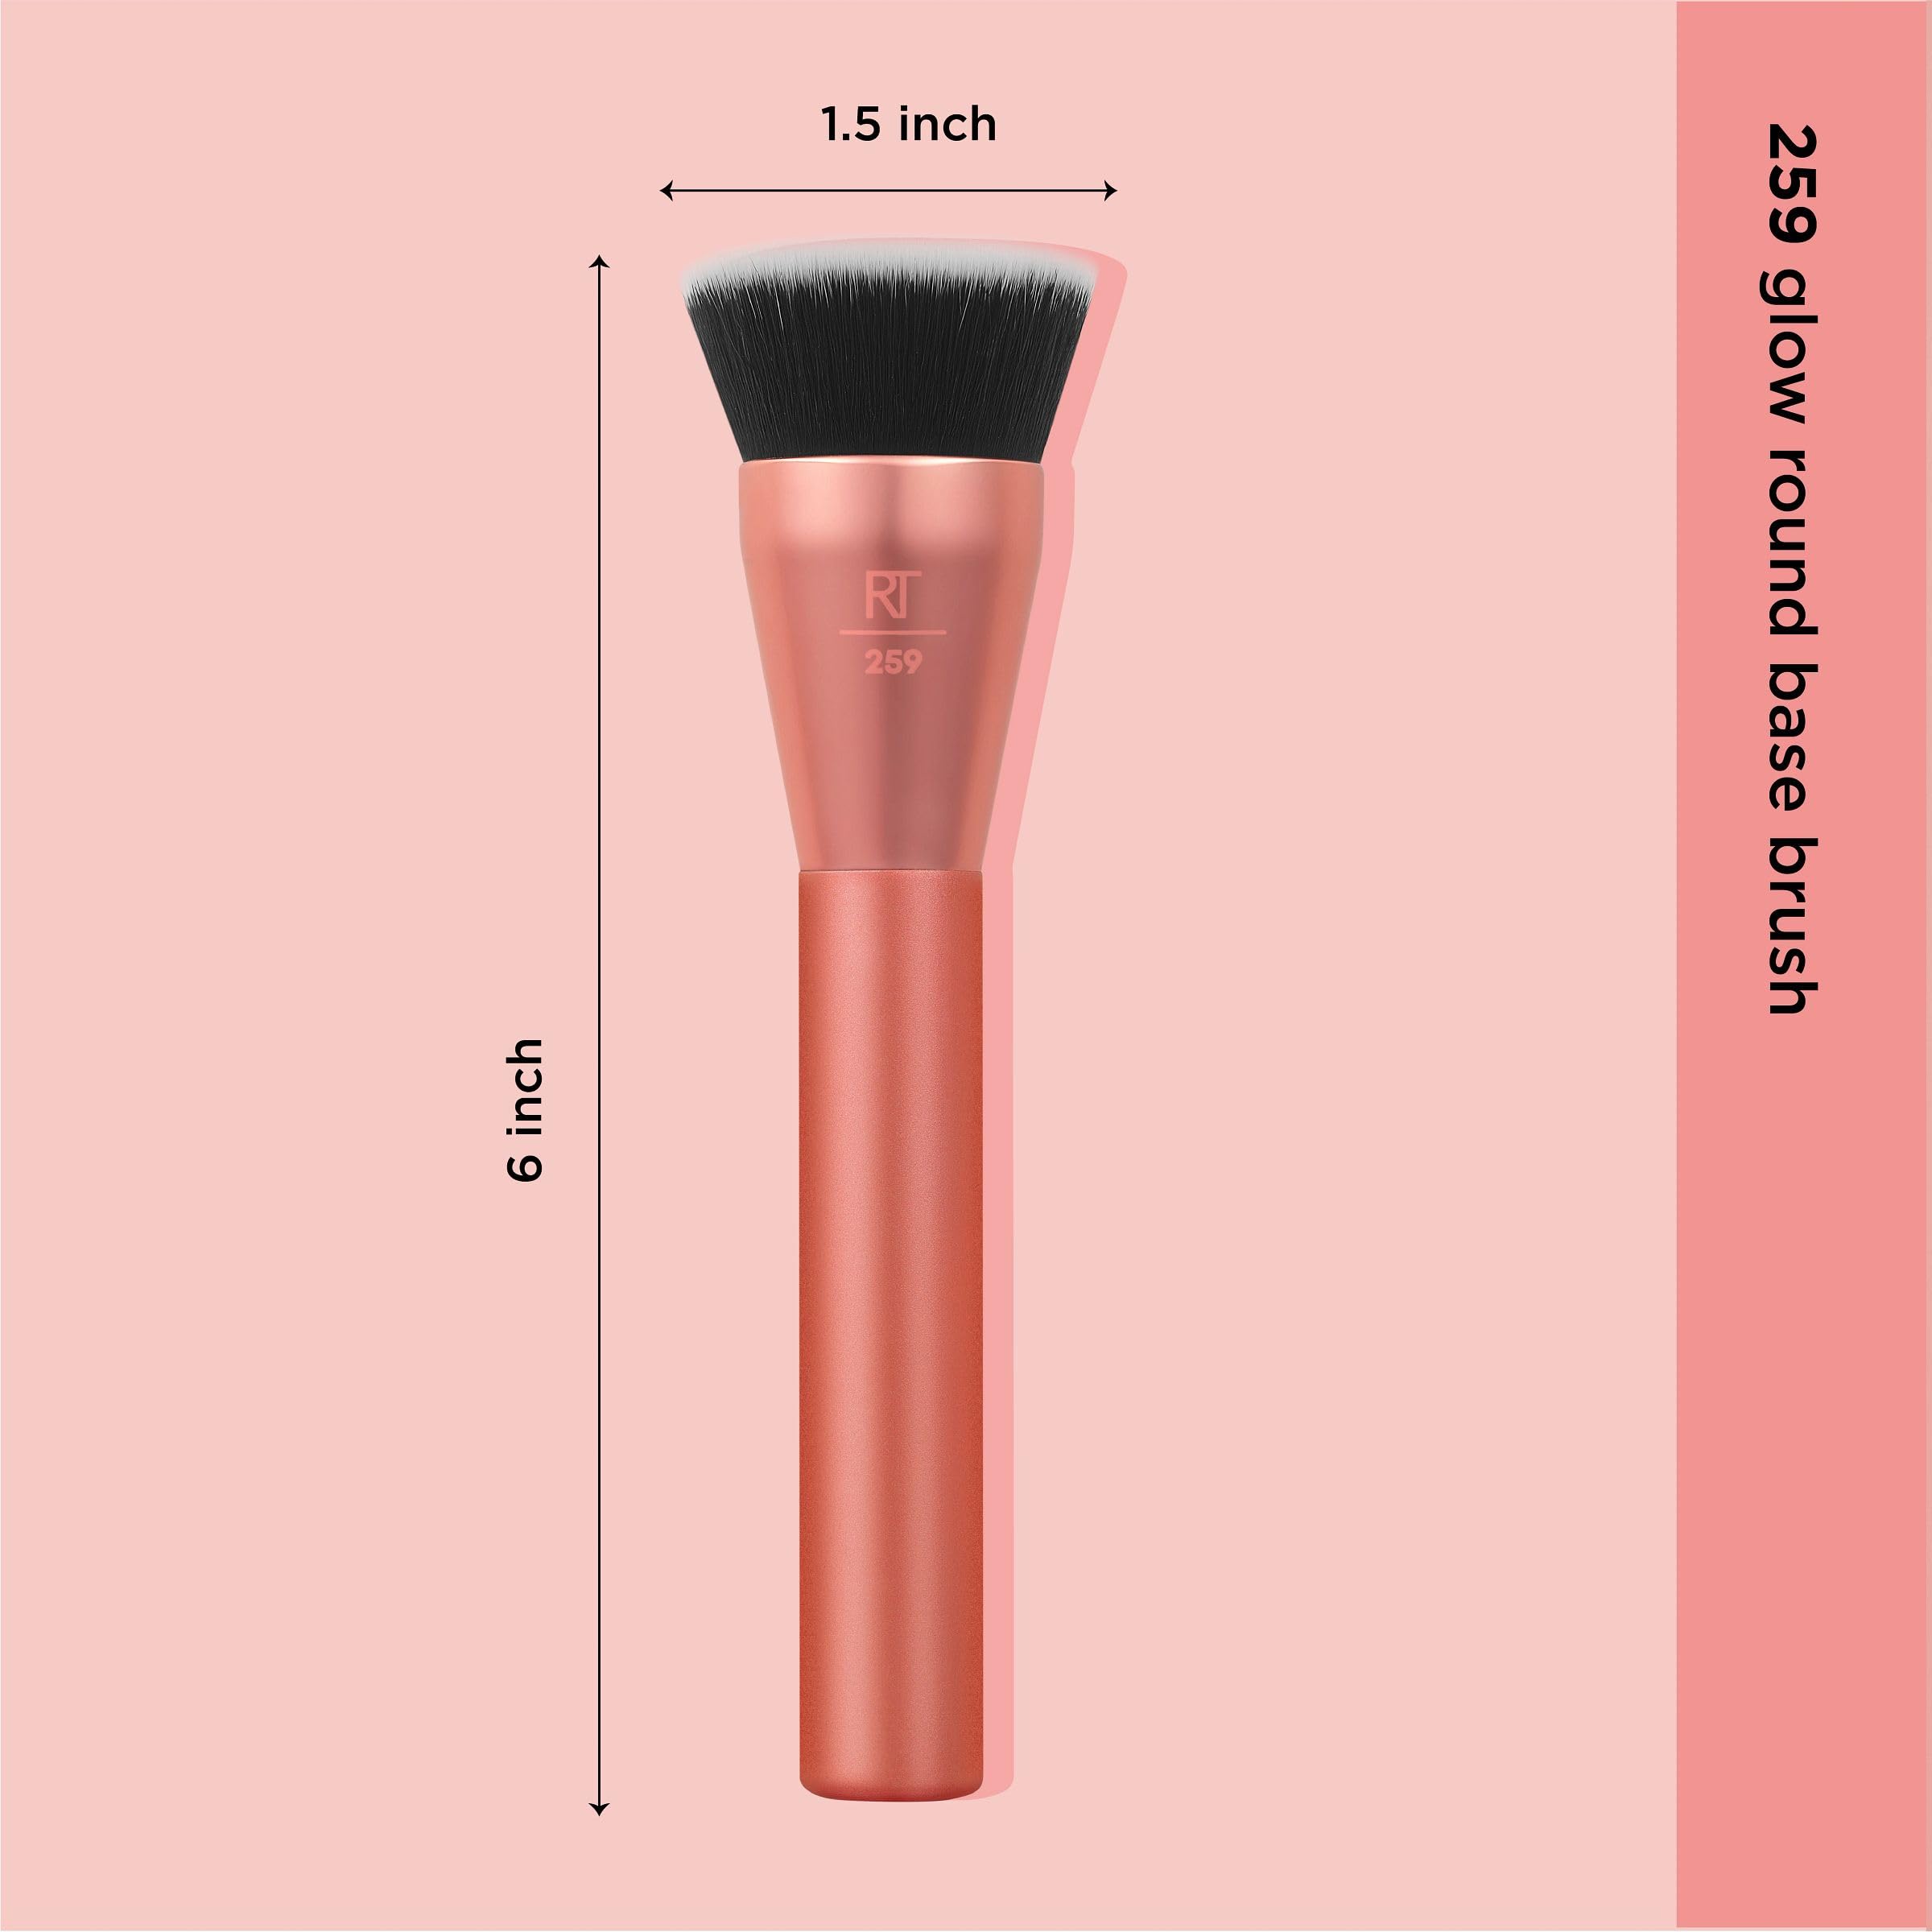 Real Techniques Glow Round Base Makeup Brush, For Liquid & Cream Makeup, Flat Top Foundation Brush For Buffing & Blending, Dense Synthetic Bristles, Vegan & Cruelty Free, 1 Count